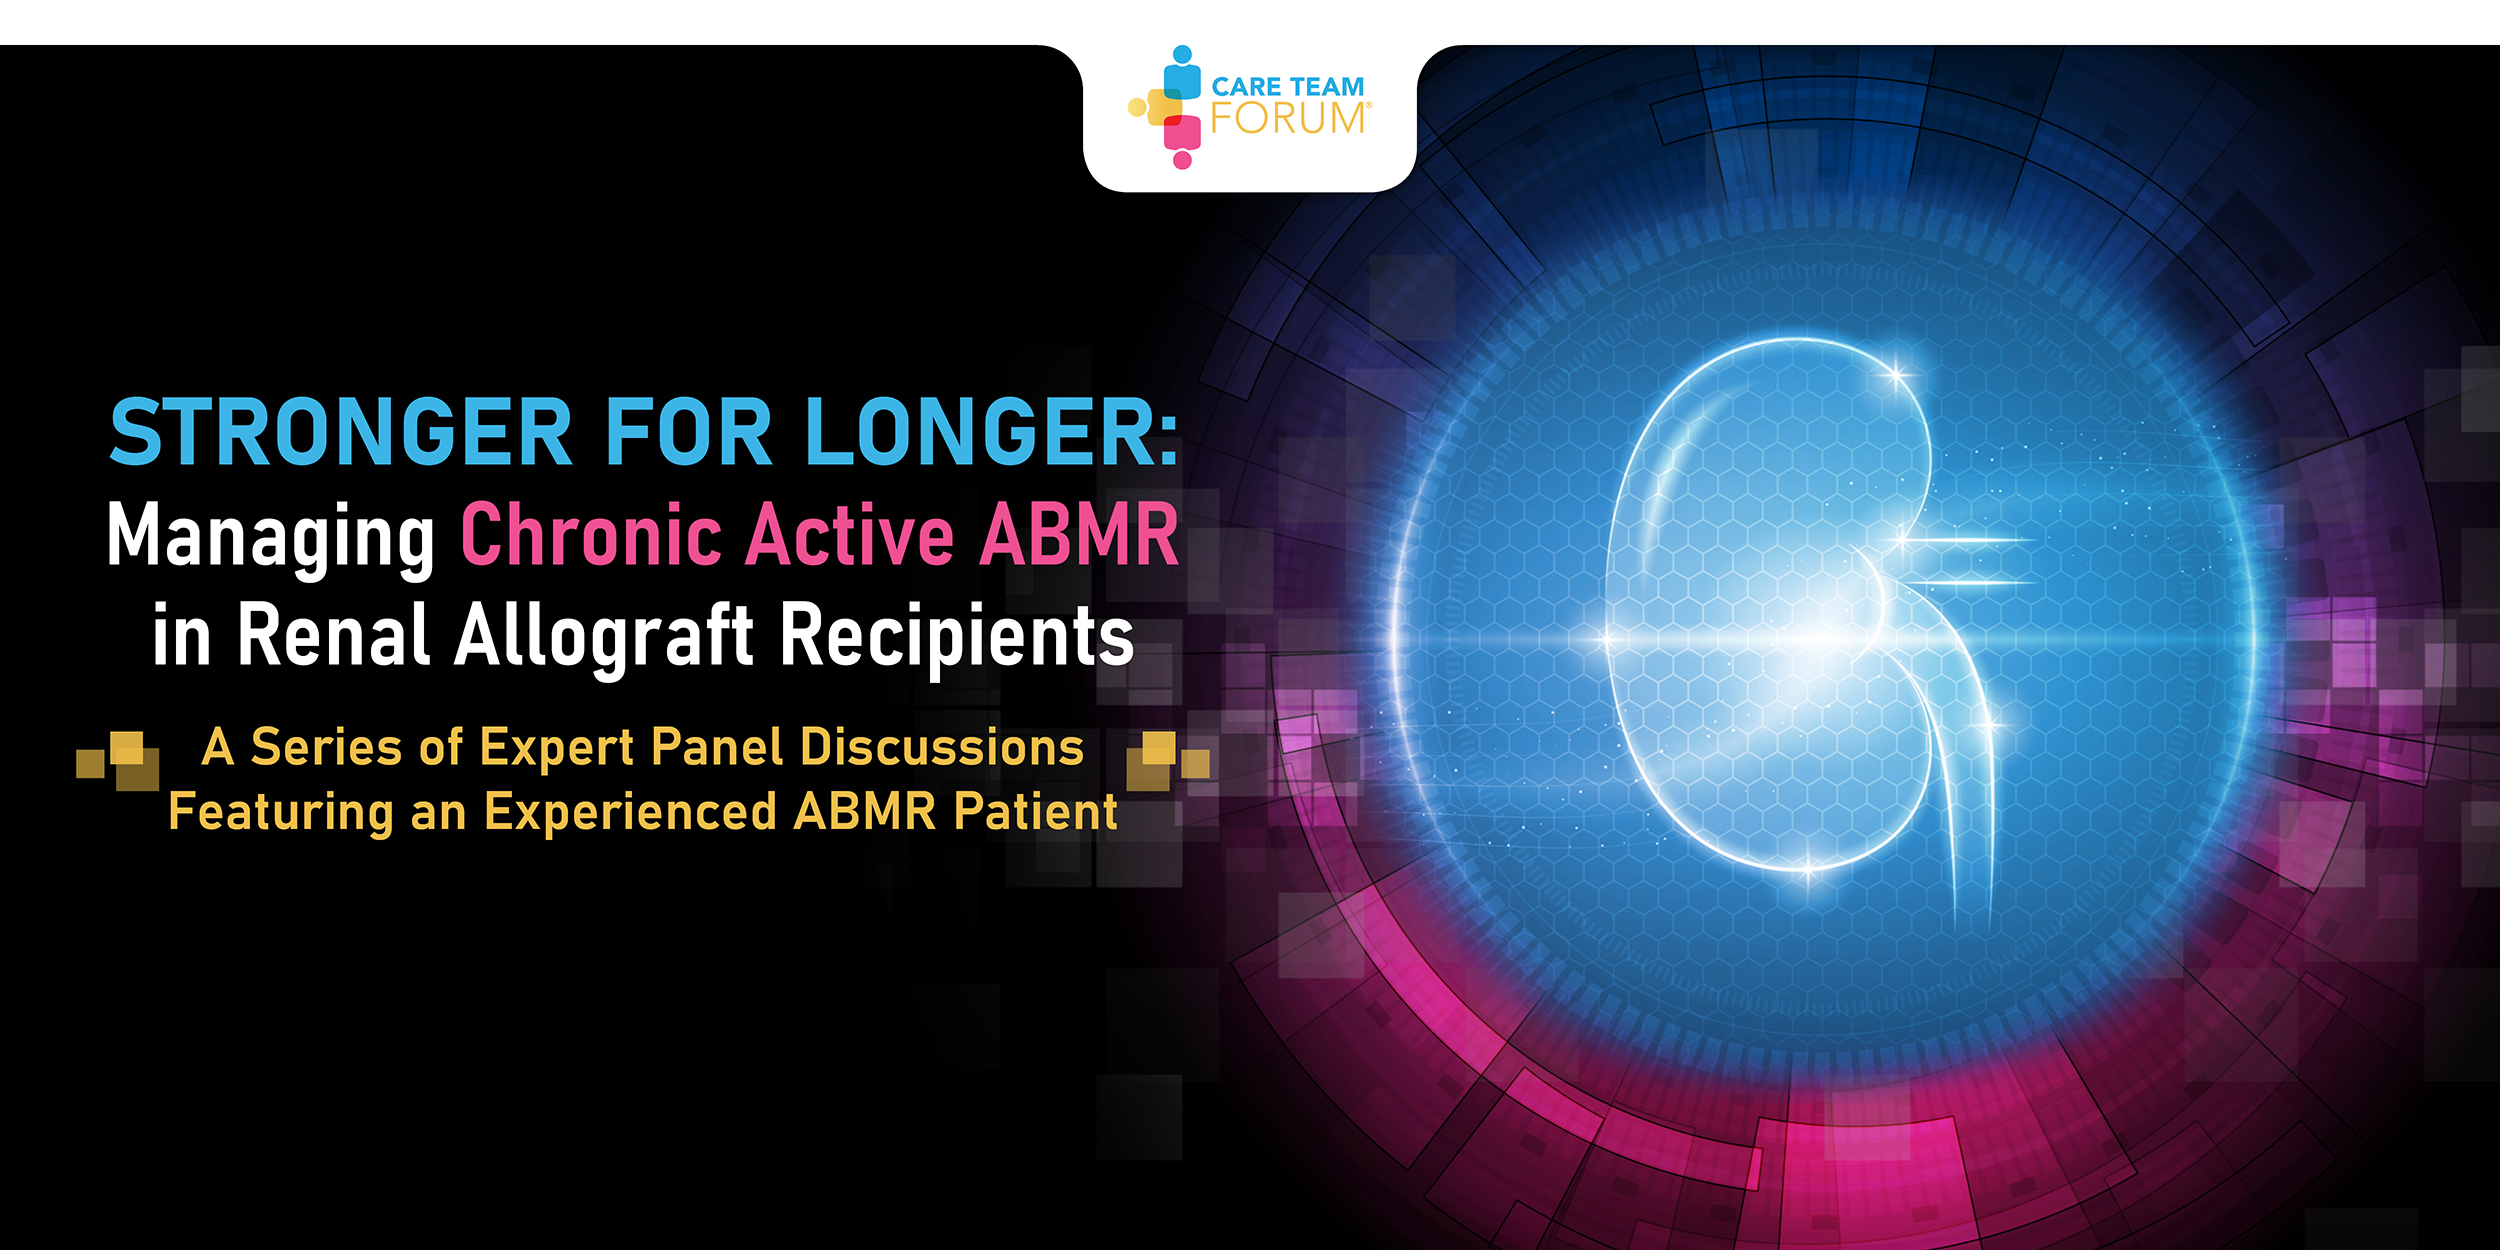 STRONGER FOR LONGER: Managing Chronic Active ABMR in Renal Allograft Recipients. A Series of Expert Panel Discussions Featuring an Experienced ABMR Patient.